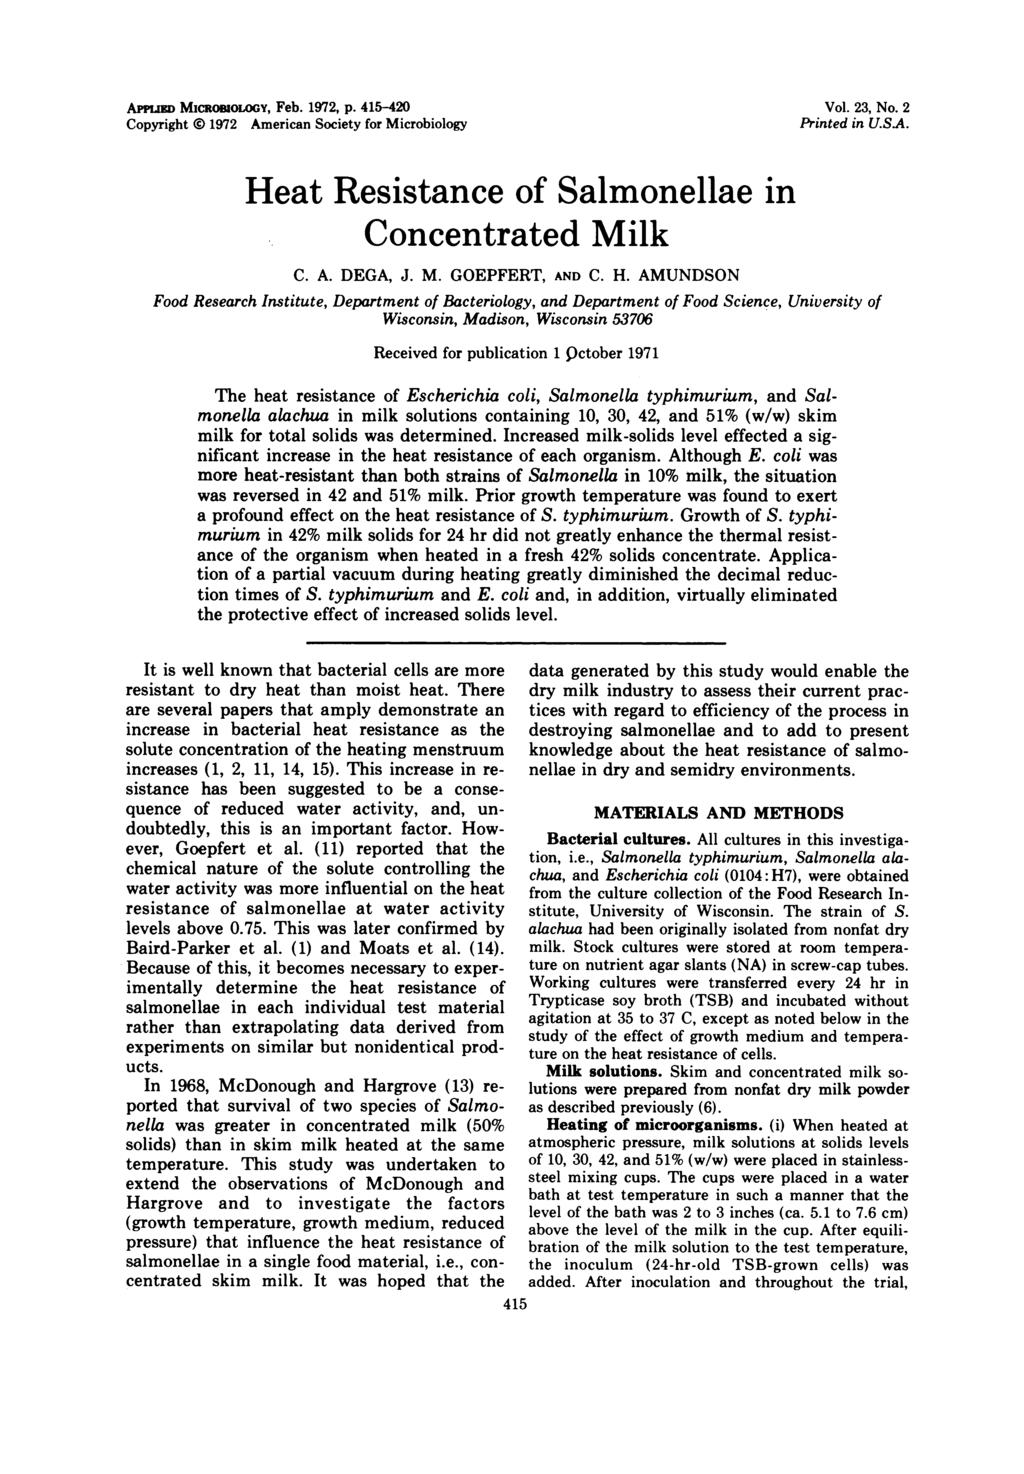 APPLIED MIcRosaoLOGY, Feb. 1972, p. 415-420 Vol. 23, No. 2 Copyright @ 1972 American Society for Microbiology Printed in USA. Heat Resistance of Salmonellae in Concentrated Milk C. A. DEGA, J. M. GOEPFERT, AND C.